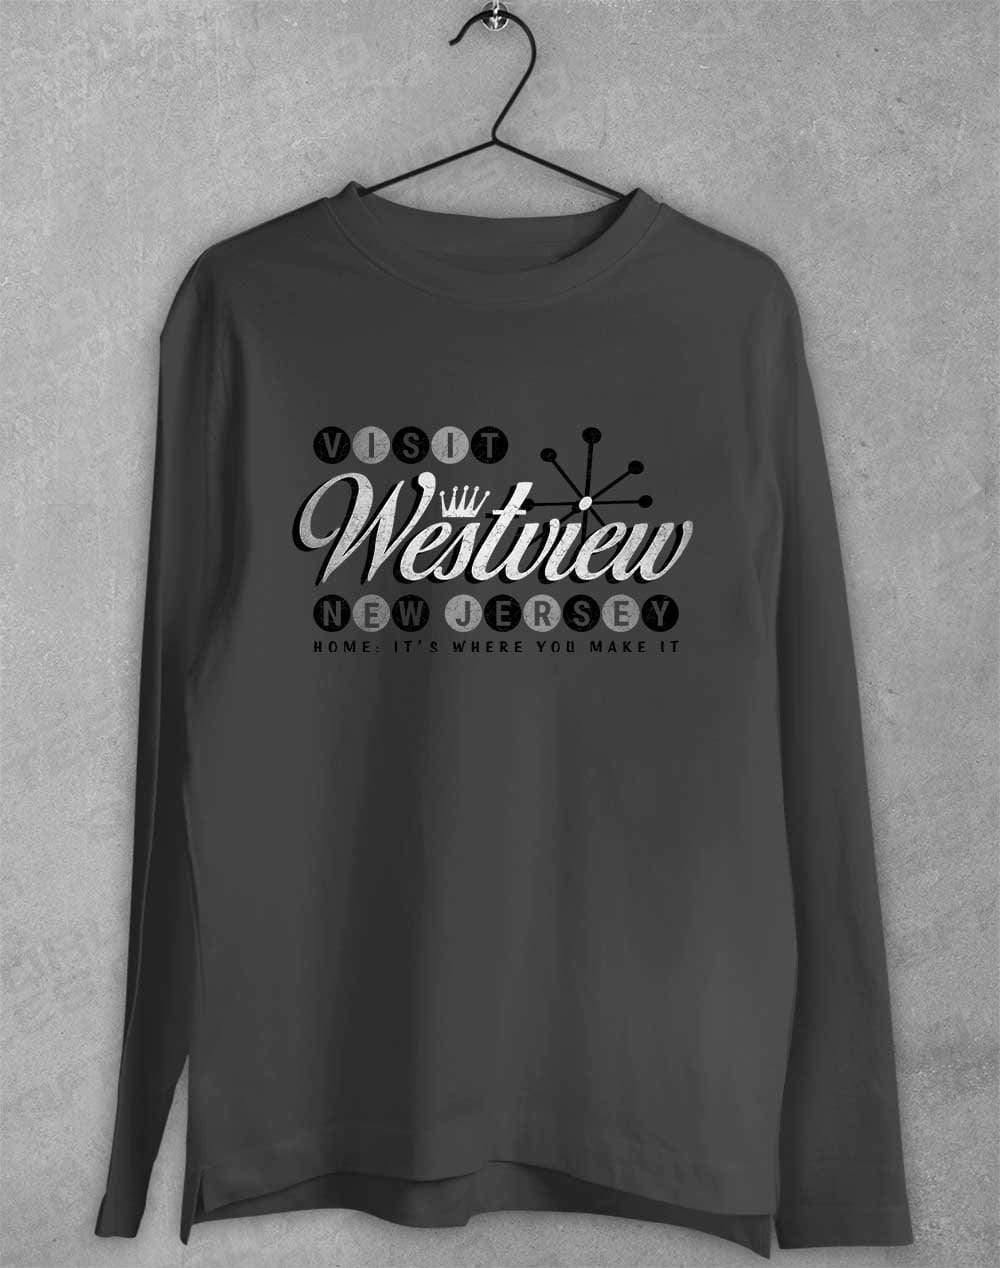 Visit Westview New Jersey Long Sleeve T-Shirt S / Charcoal  - Off World Tees